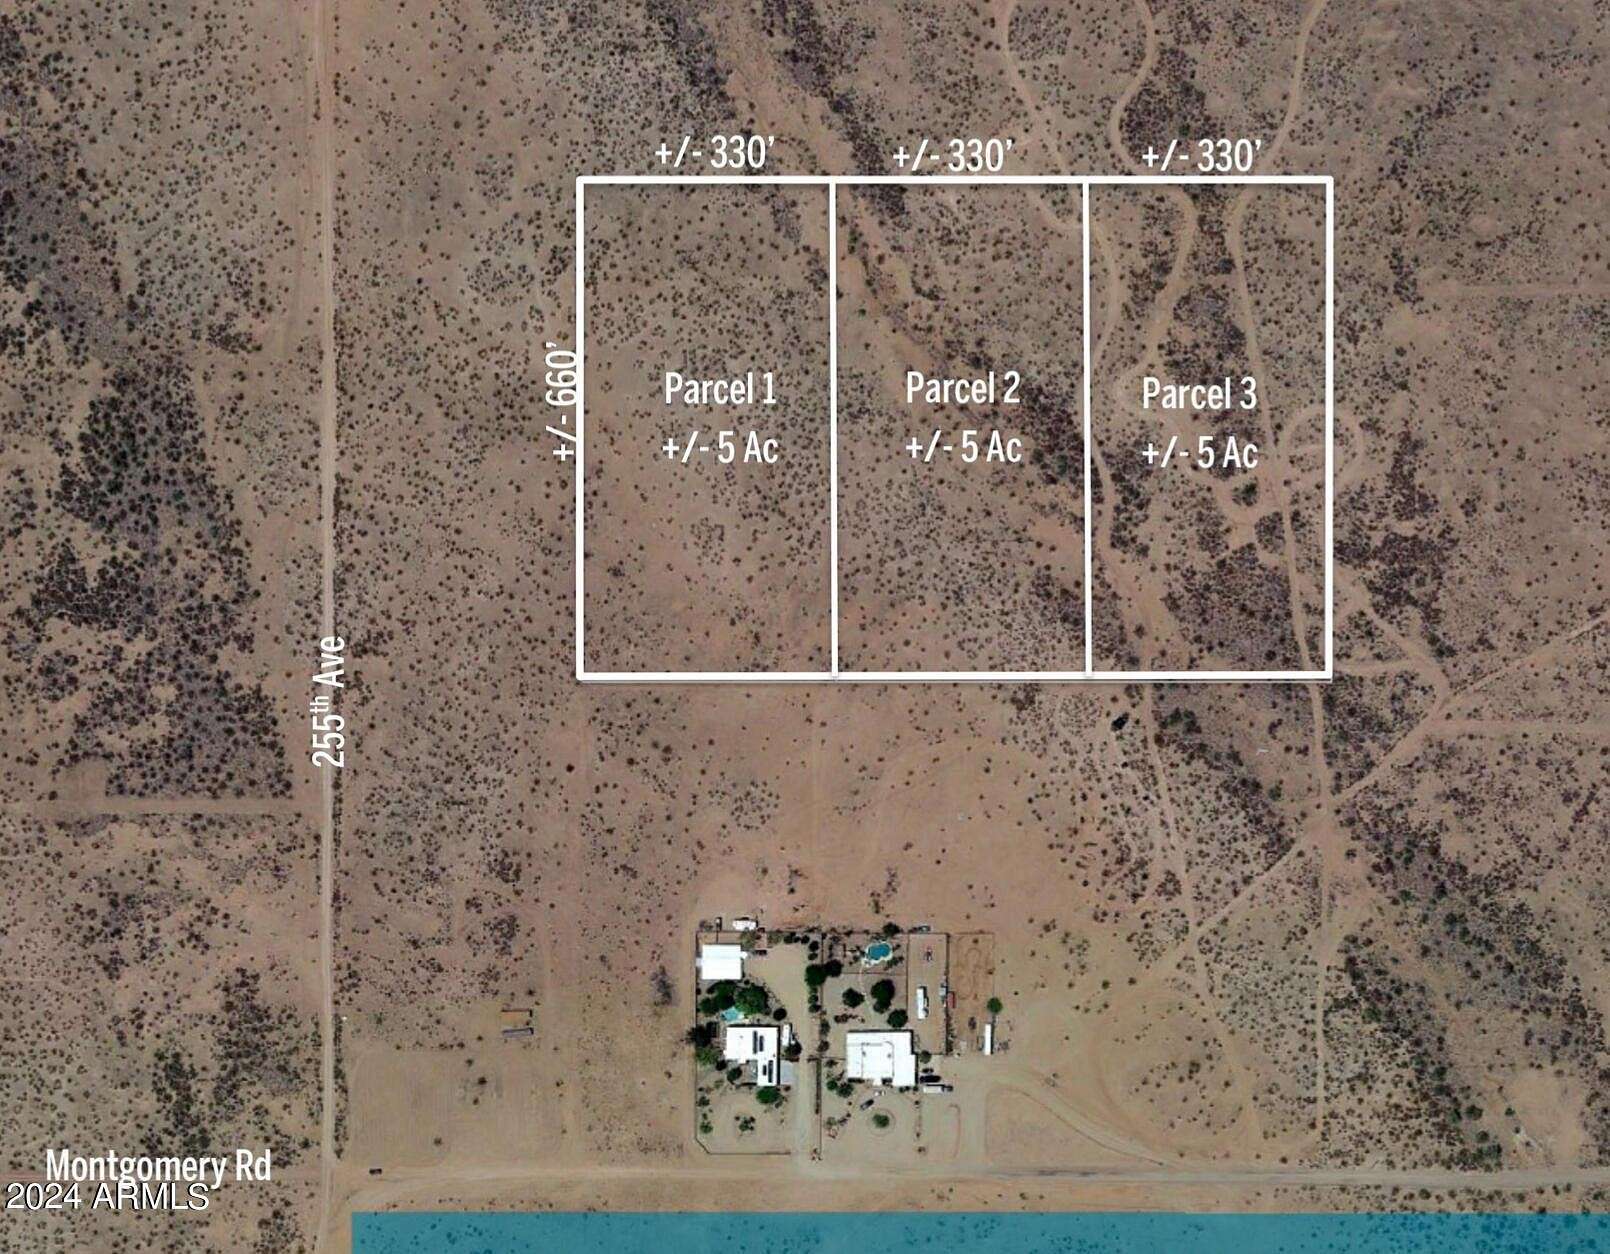 5 Acres of Land for Sale in Wittmann, Arizona